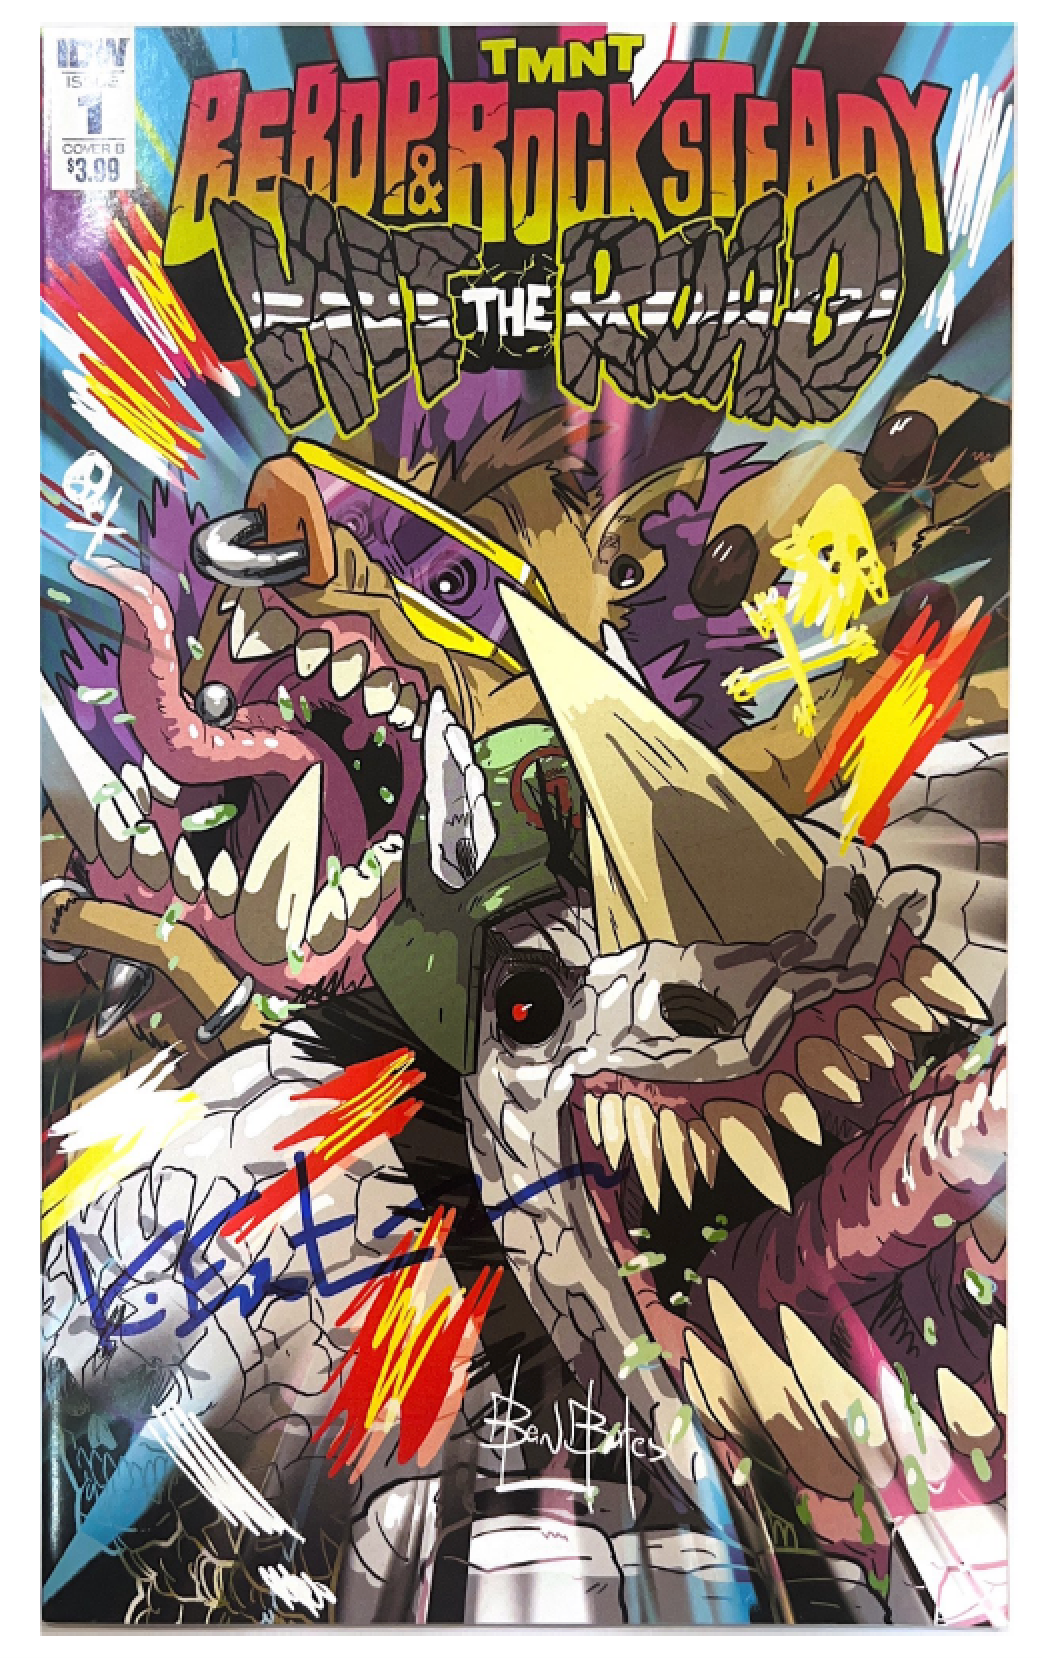 TMNT Bebop & Rocksteady Hit the Road #1 signed by Kevin Eastman